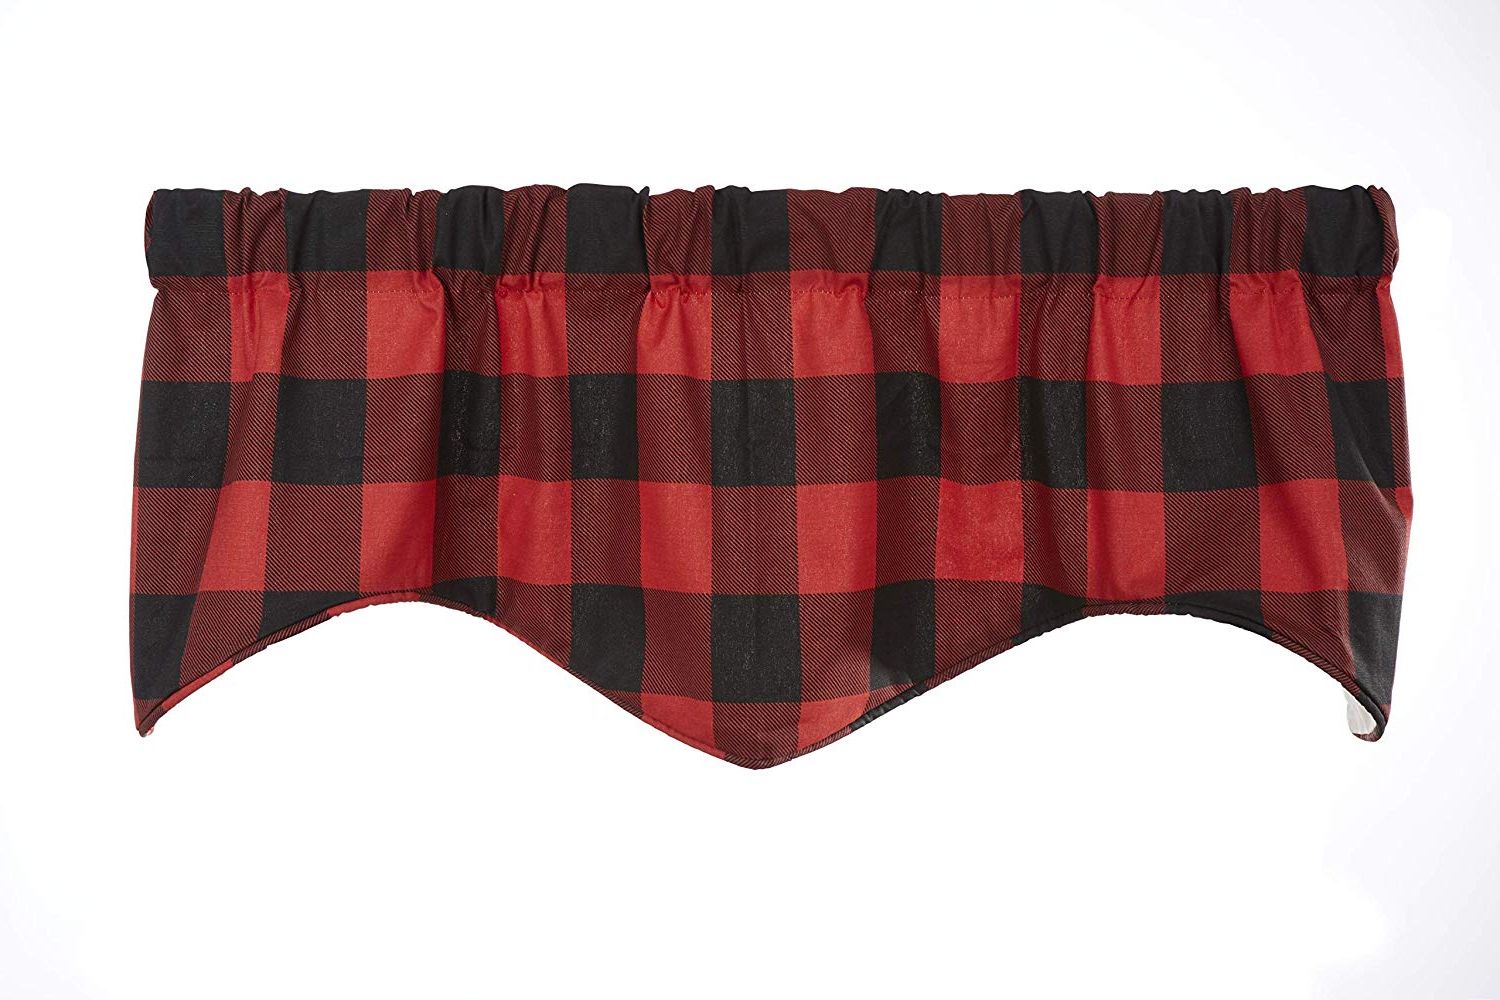 Red Rustic Kitchen Curtains In Recent Buffalo Plaid Kitchen Curtains Valance Curtains Window Valences Kitchen  Valances For Windows Modern Farmhouse Kitchen Decor Country Rustic Decor  Red (View 9 of 20)